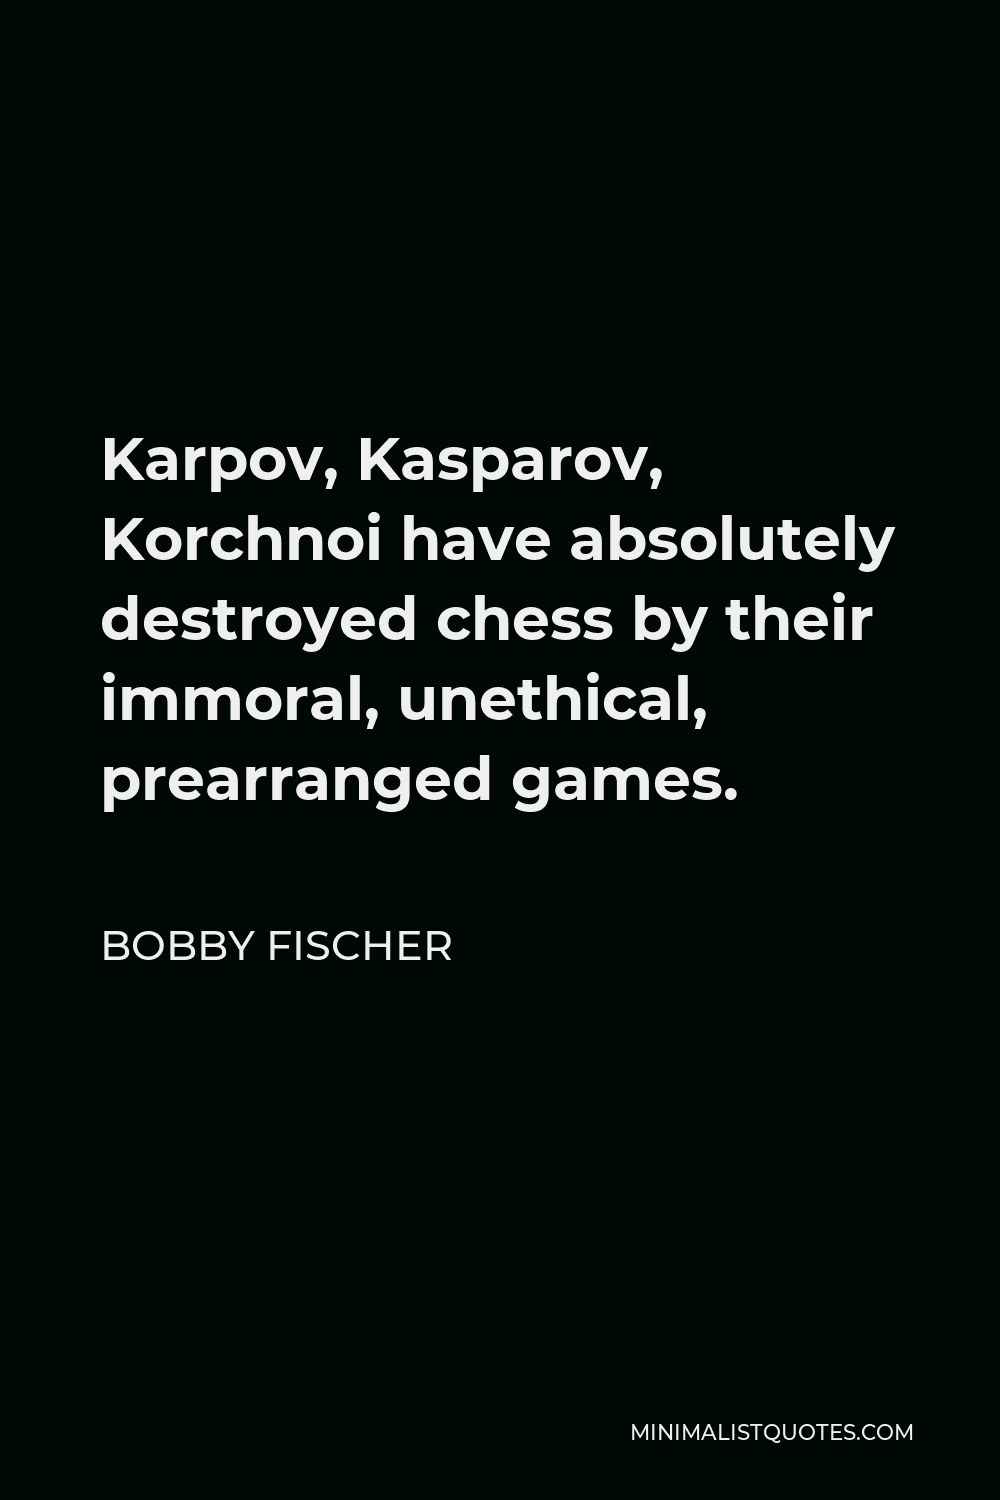 Bobby Fischer Quote - Karpov, Kasparov, Korchnoi have absolutely destroyed chess by their immoral, unethical, prearranged games.